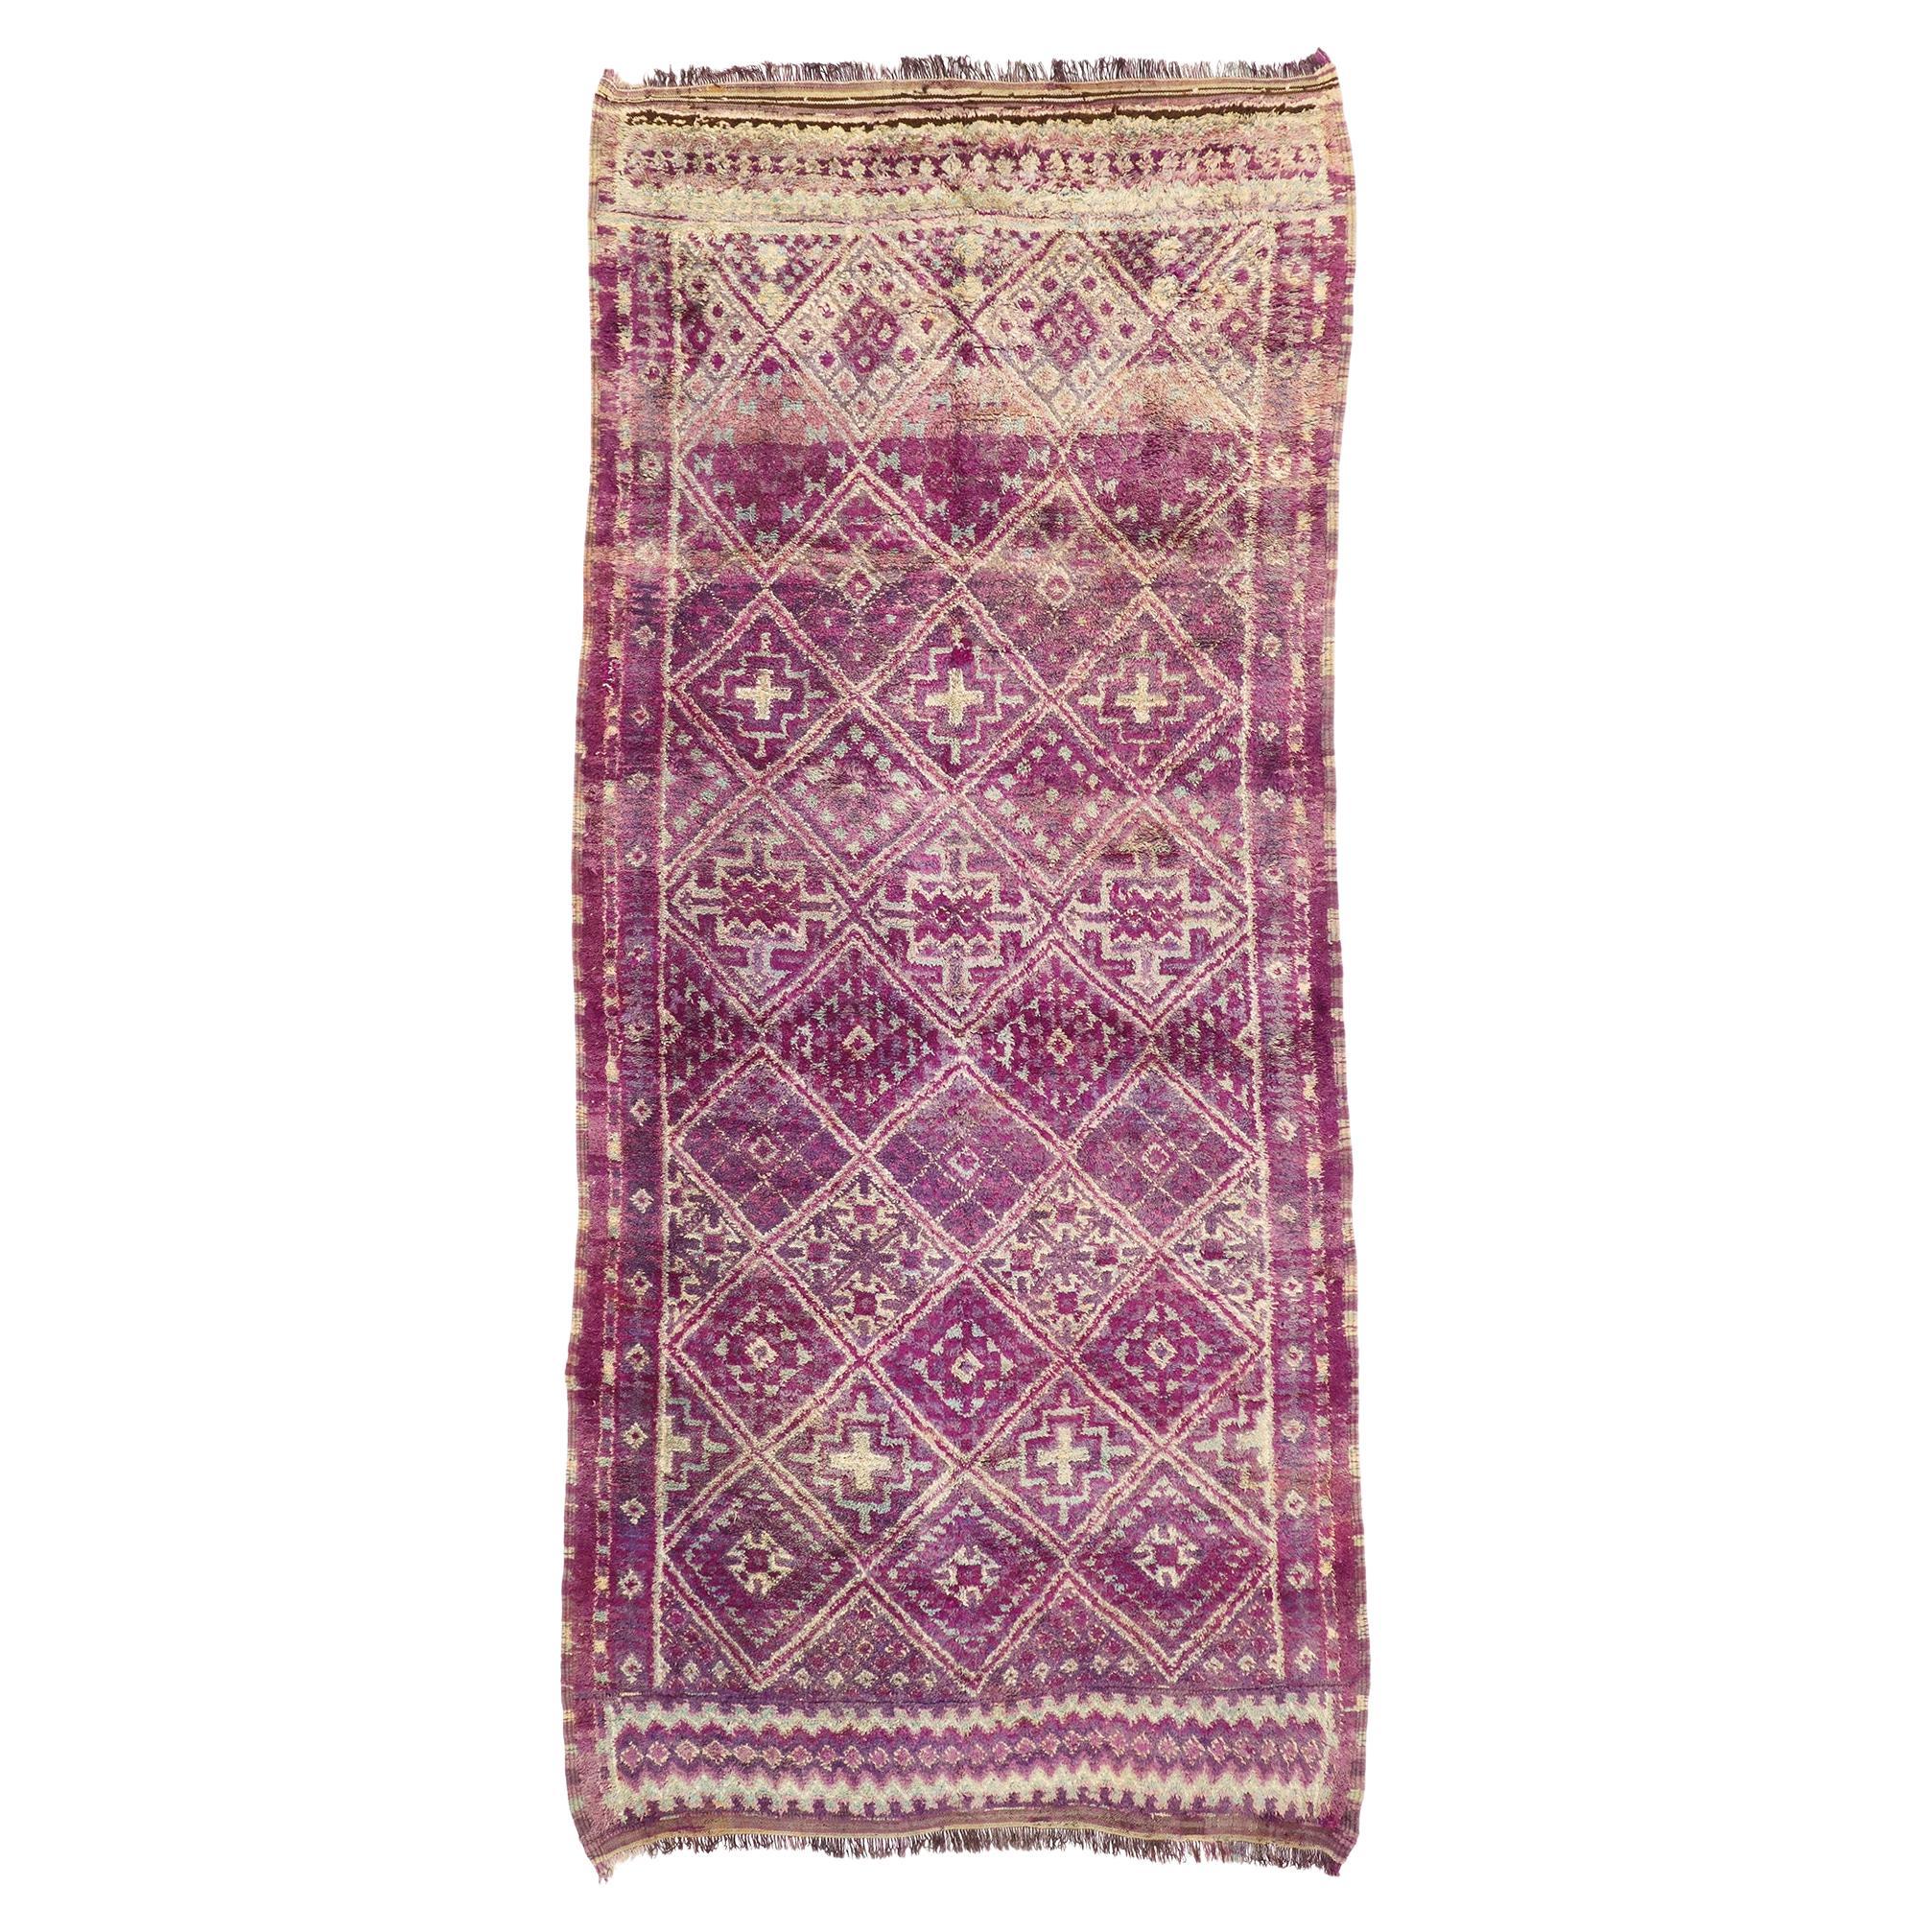 Vintage Purple Beni MGuild Moroccan Rug with Tribal Style, Berber Moroccan Rug For Sale